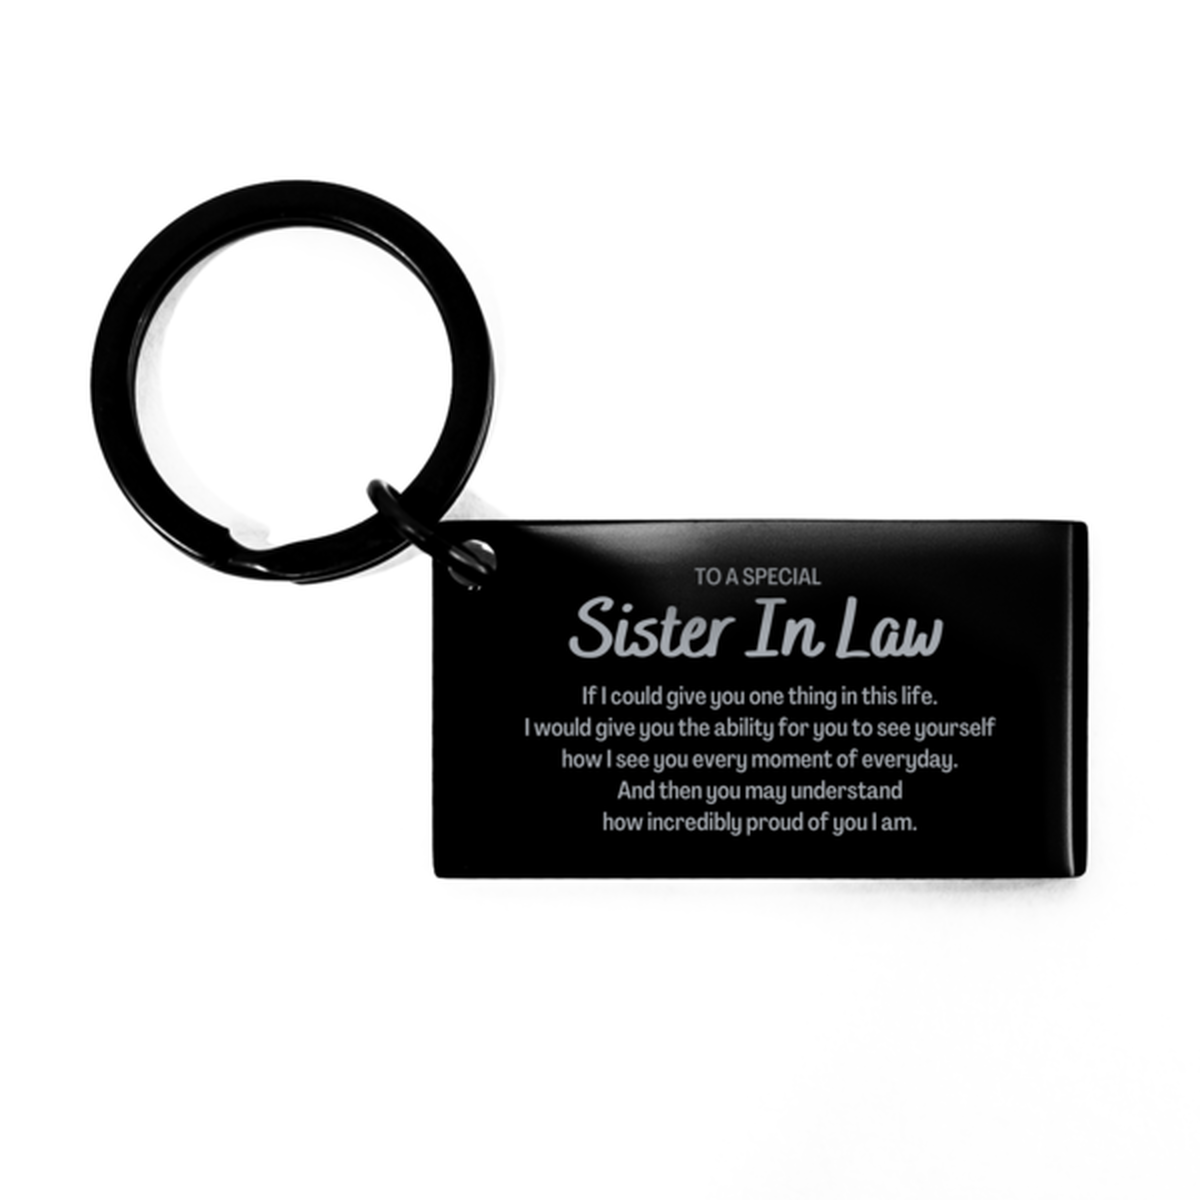 To My Sister In Law Keychain, Gifts For Sister In Law Engraved, Inspirational Gifts for Christmas Birthday, Epic Gifts for Sister In Law To A Special Sister In Law how incredibly proud of you I am